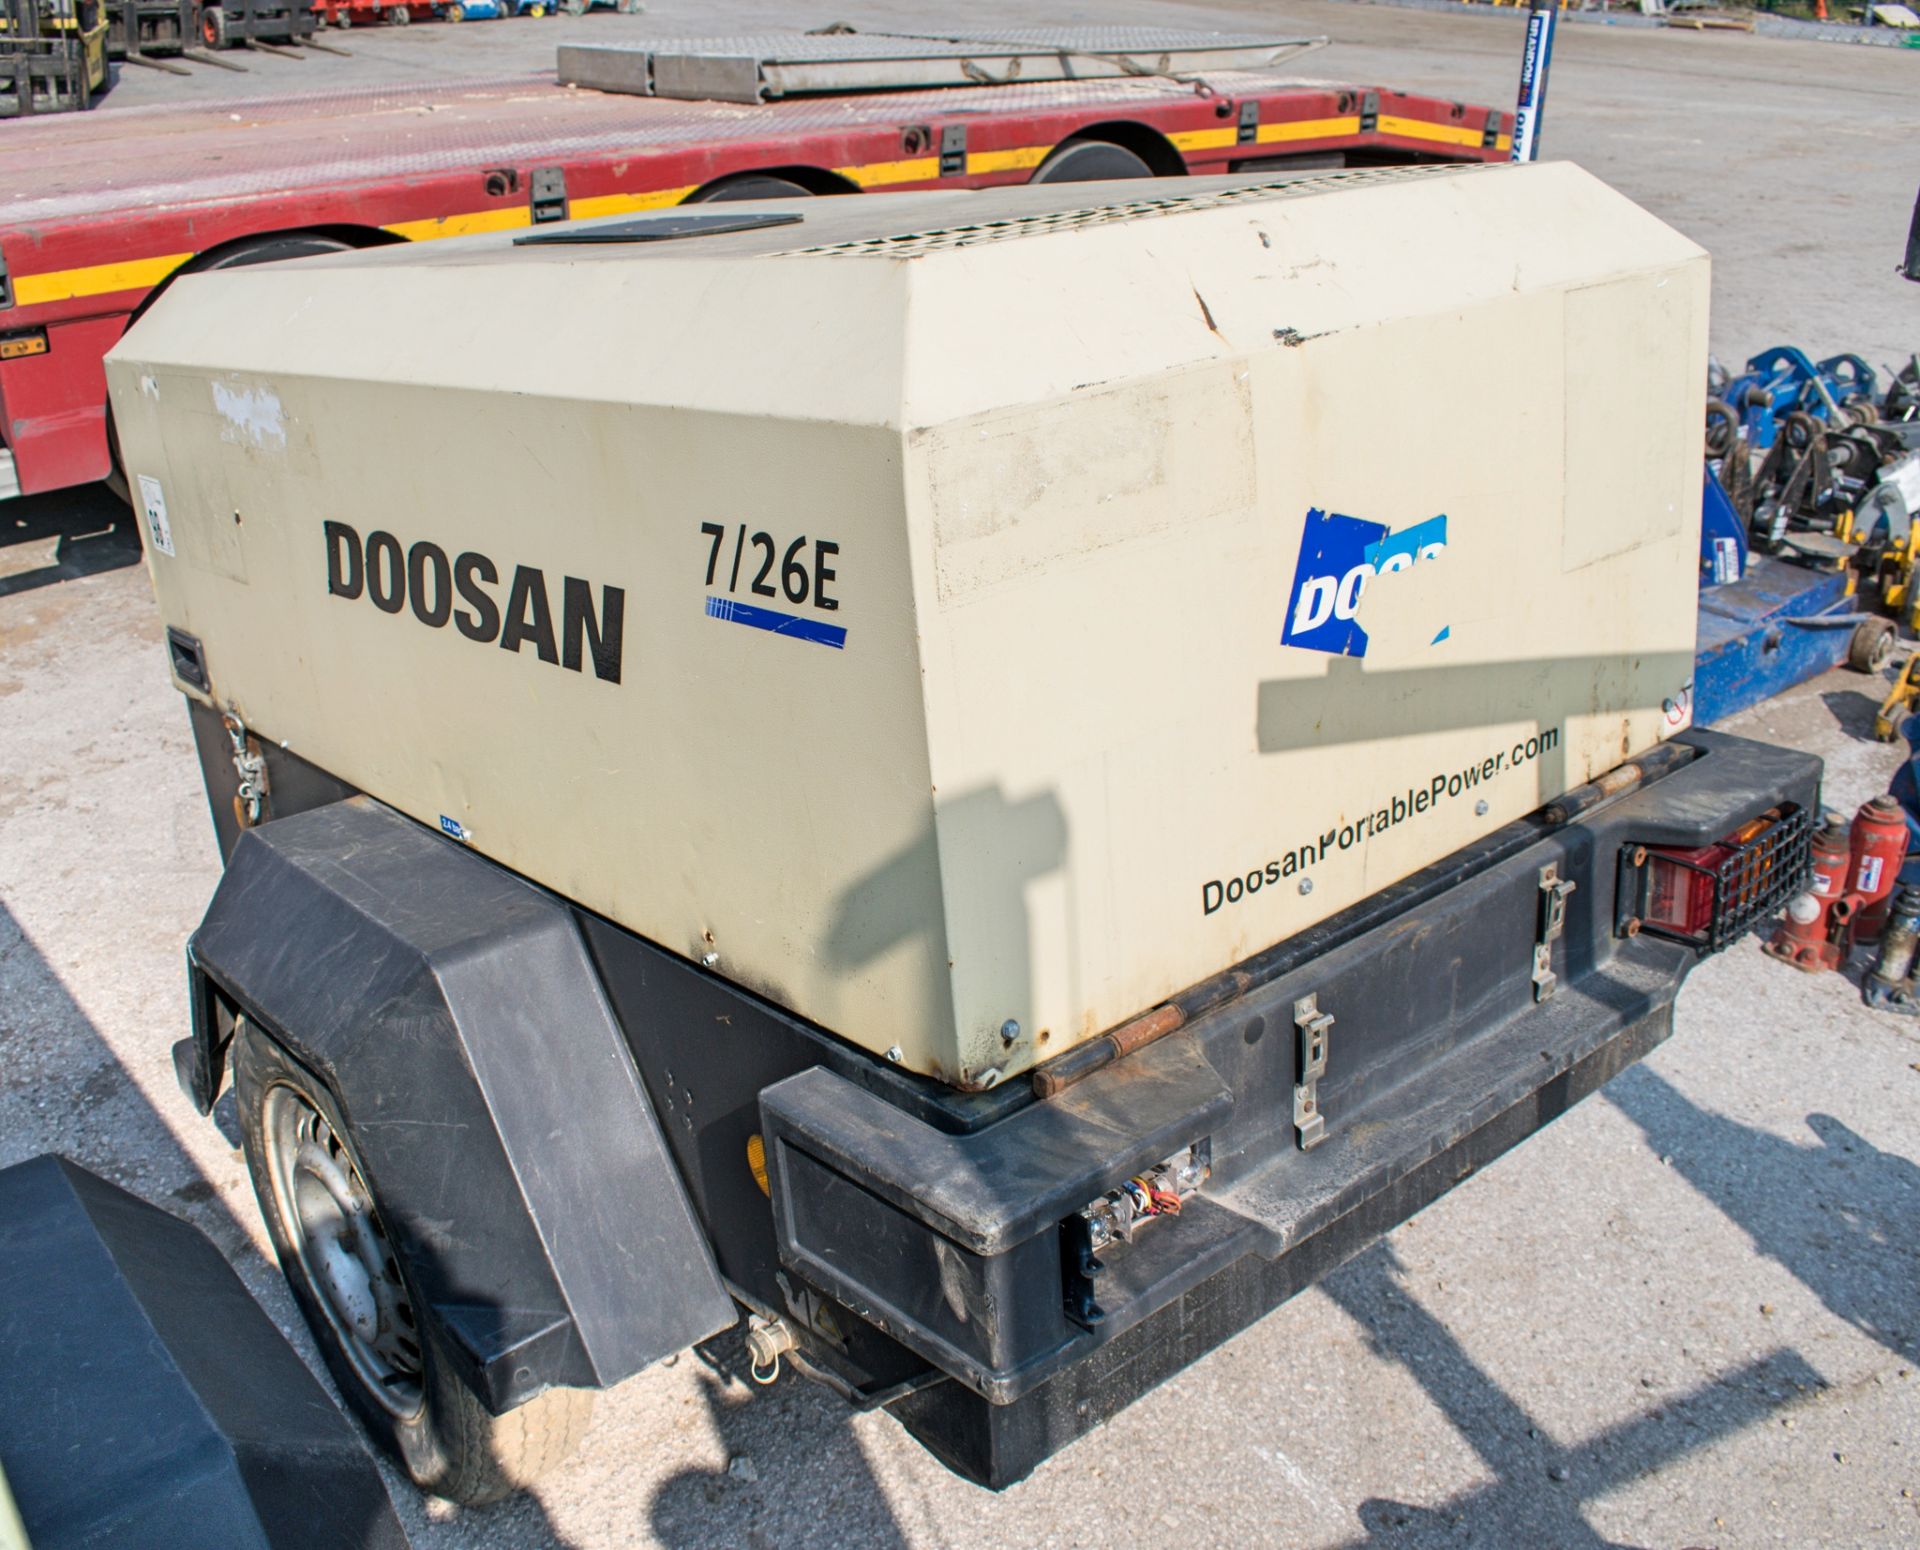 Doosan 726E diesel driven mobile air compressor/generator Year: 2012 S/N: 109260 Recorded Hours: 487 - Image 2 of 3